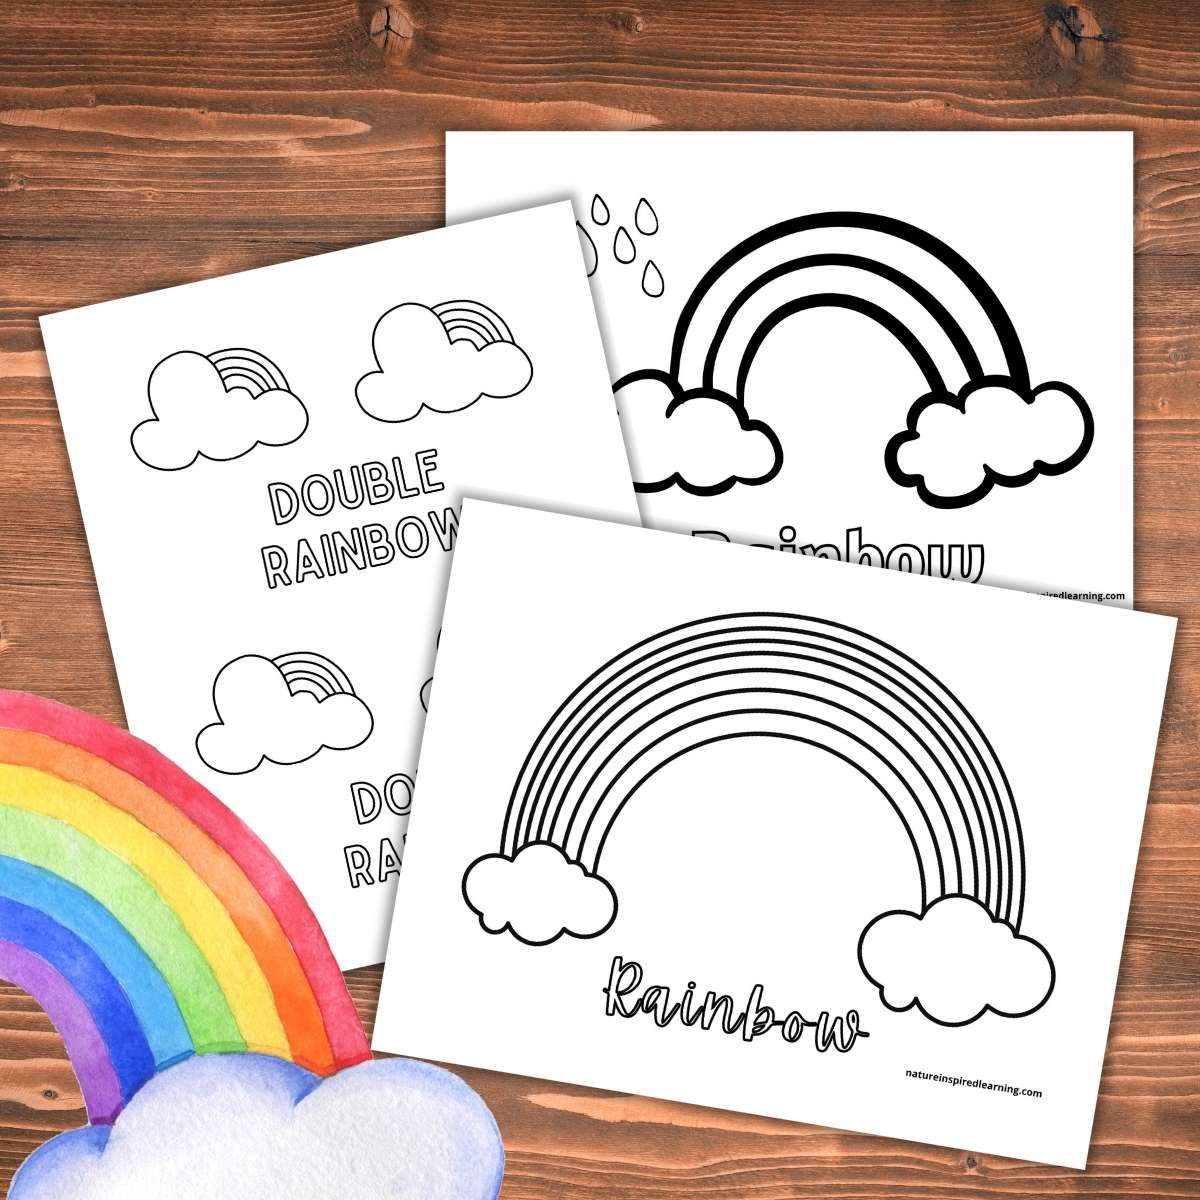 Yellow in Rainbow Friends 2 Coloring Pages - Free Printable Coloring Pages